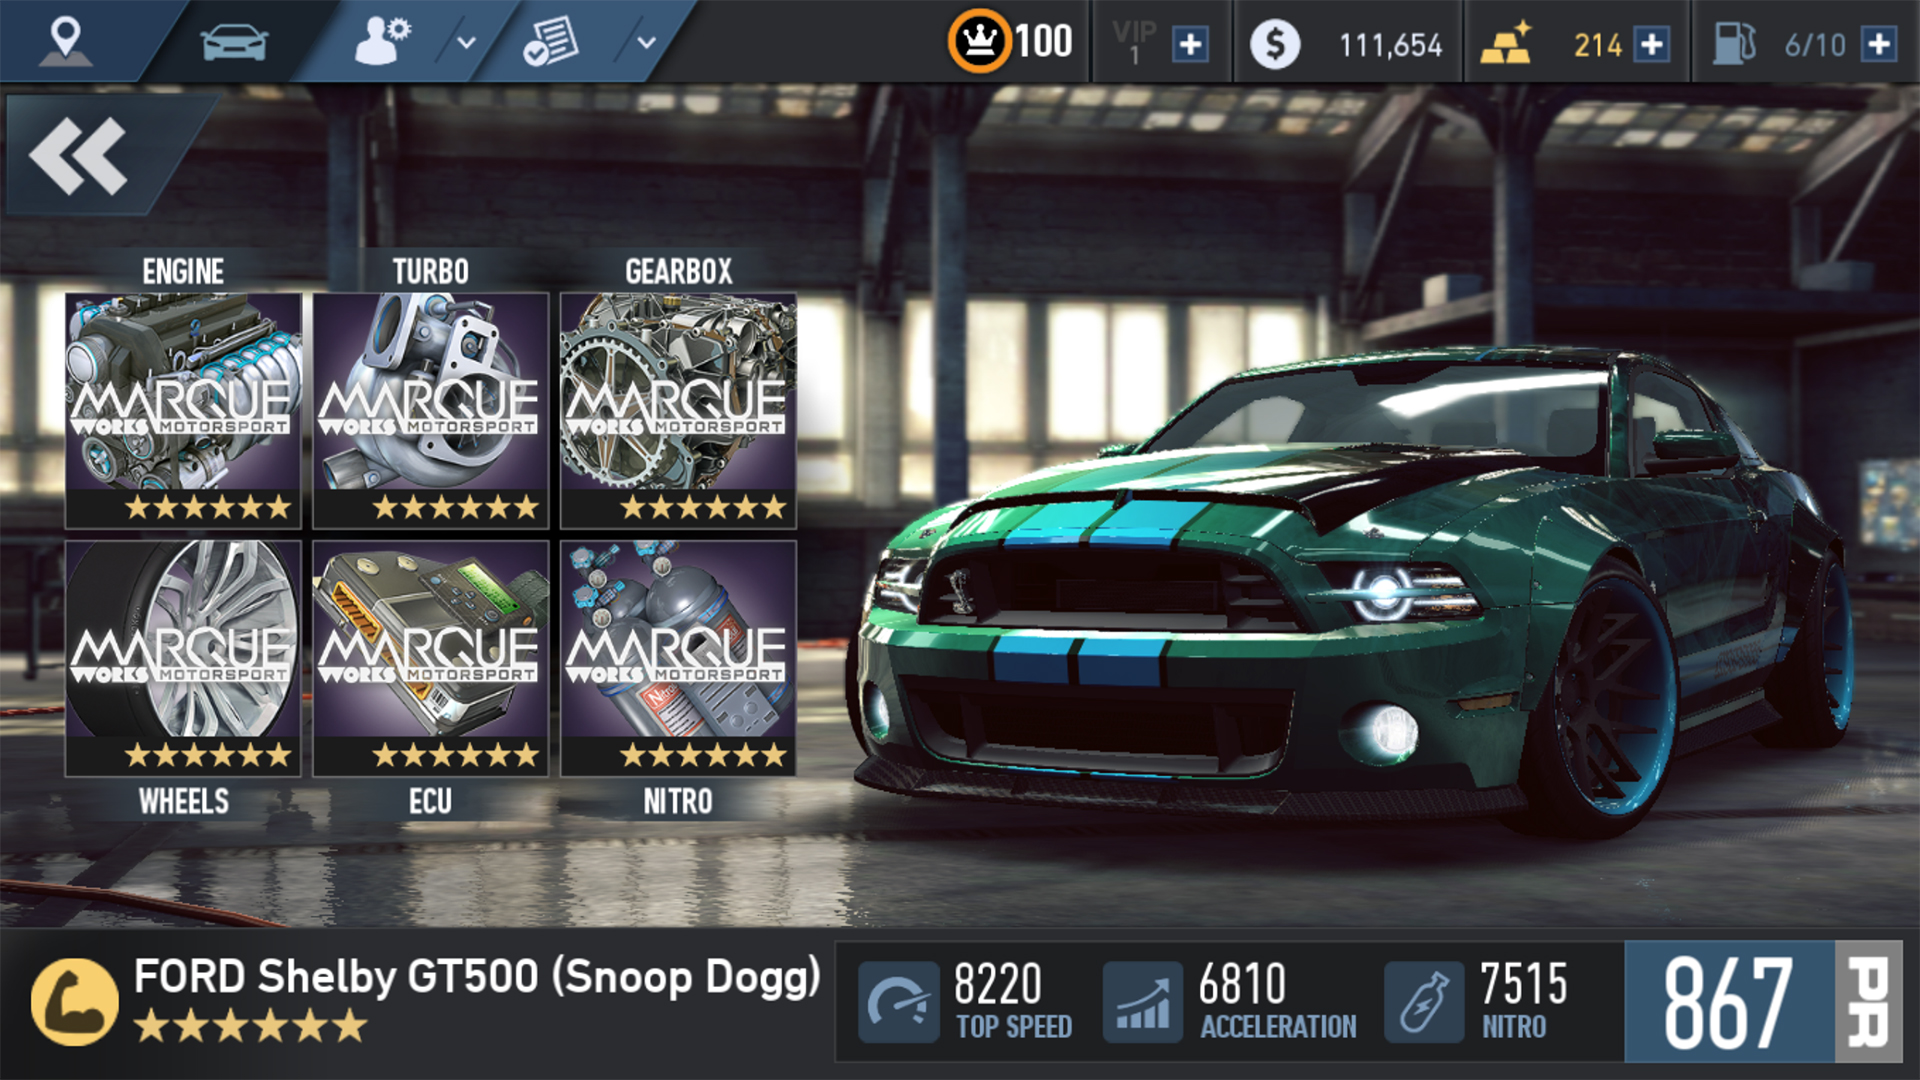 Нфс но лимит деньги золото. Ford gt 2006 NFS no limits. NFS no limits Ford Mustang gt. Ford Shelby gt500 Snoop Dogg. Ford Shelby gt500 2013 NFS no limits.